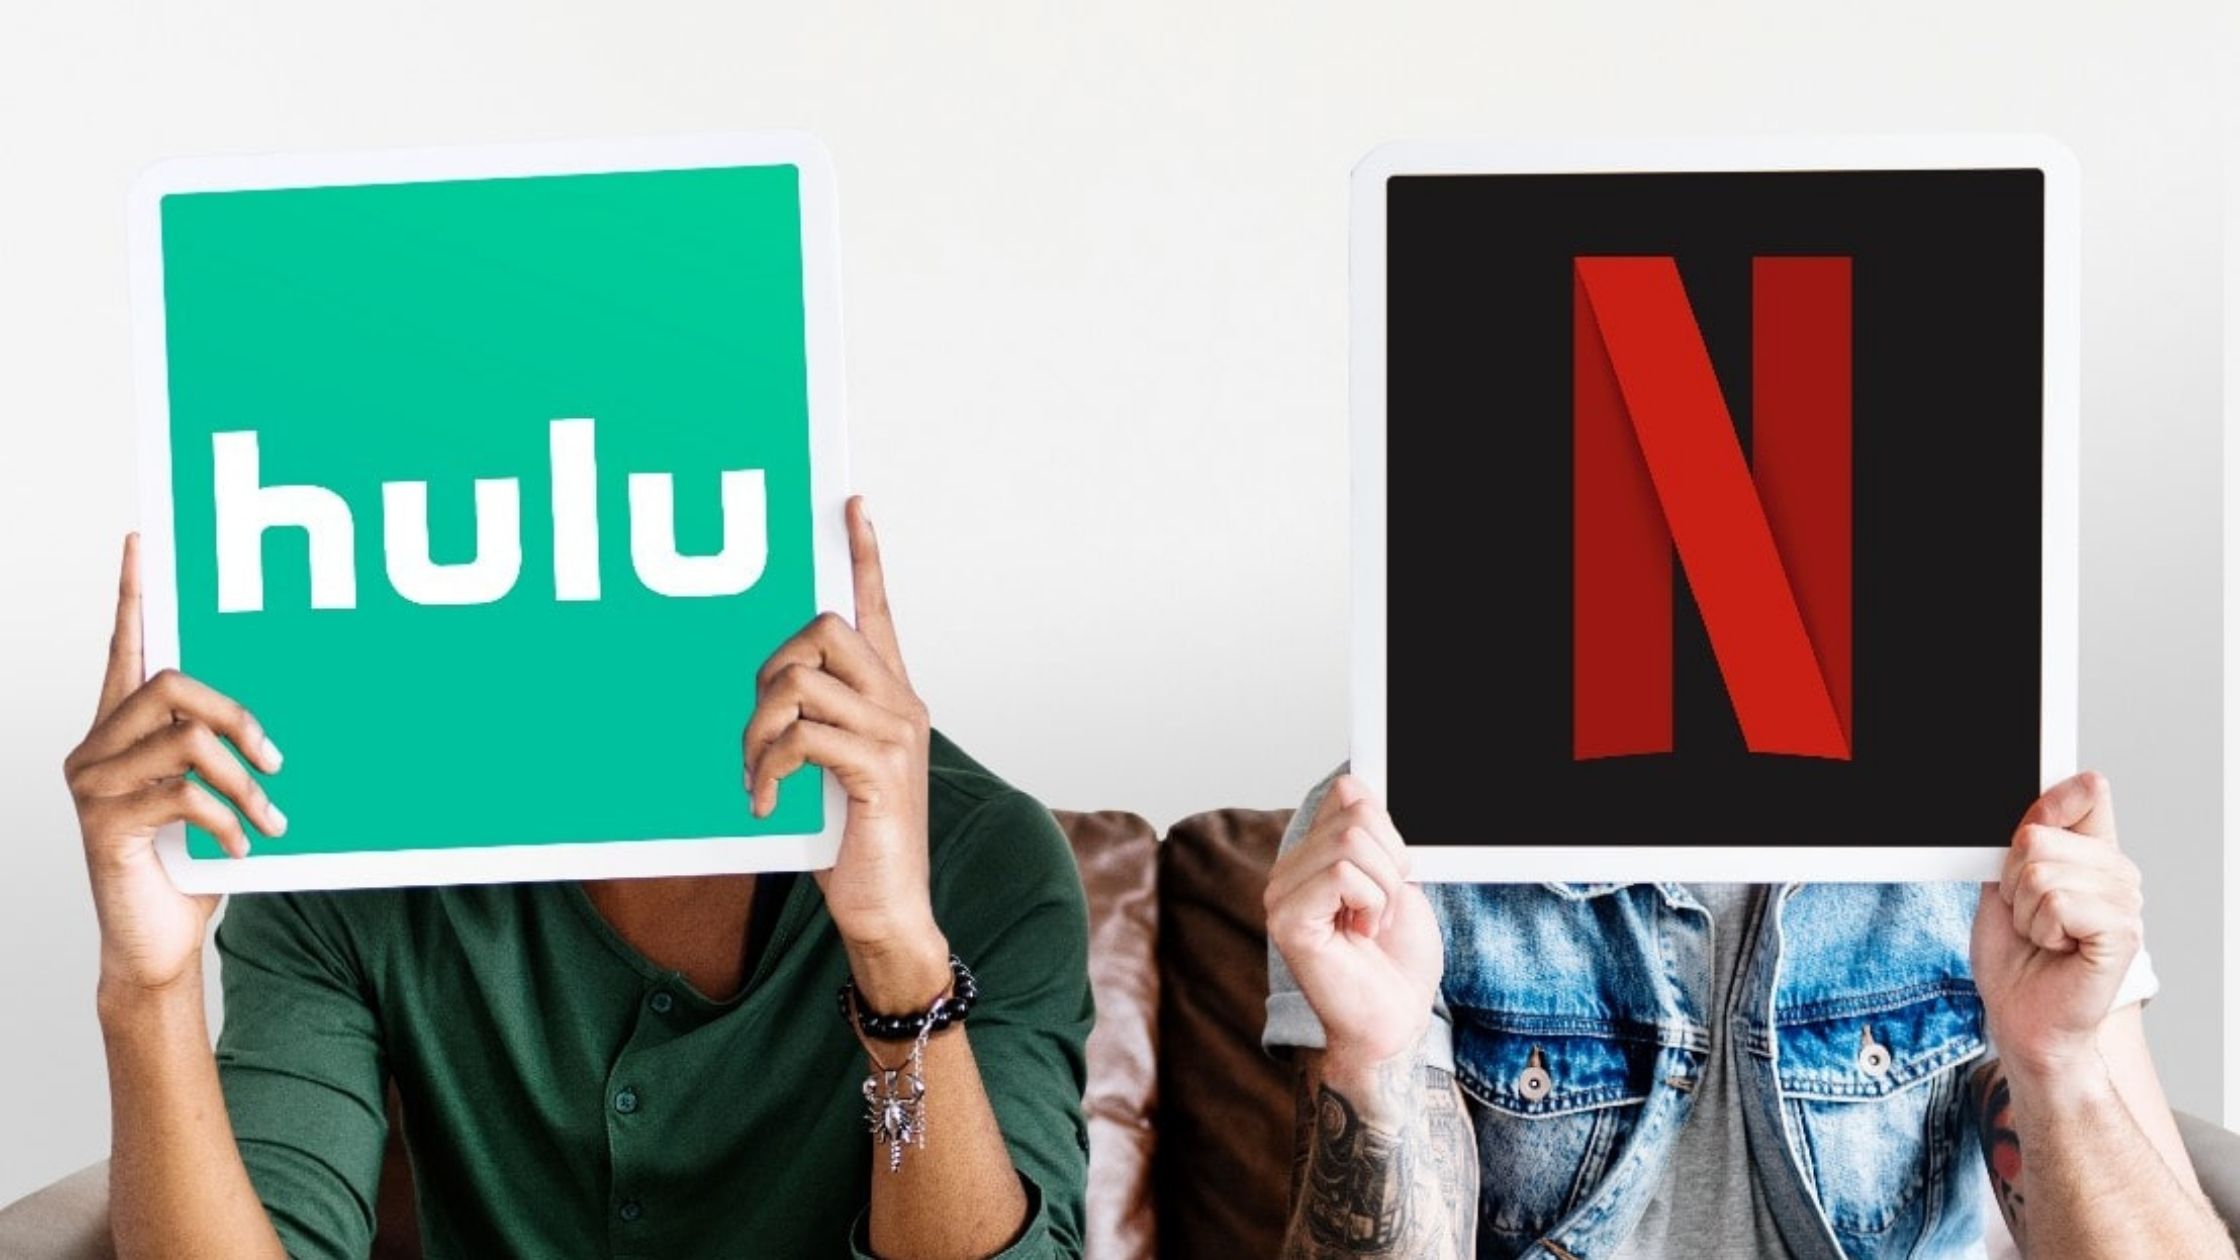 Netflix has had a Good Run. But can it Survive the New Competition?